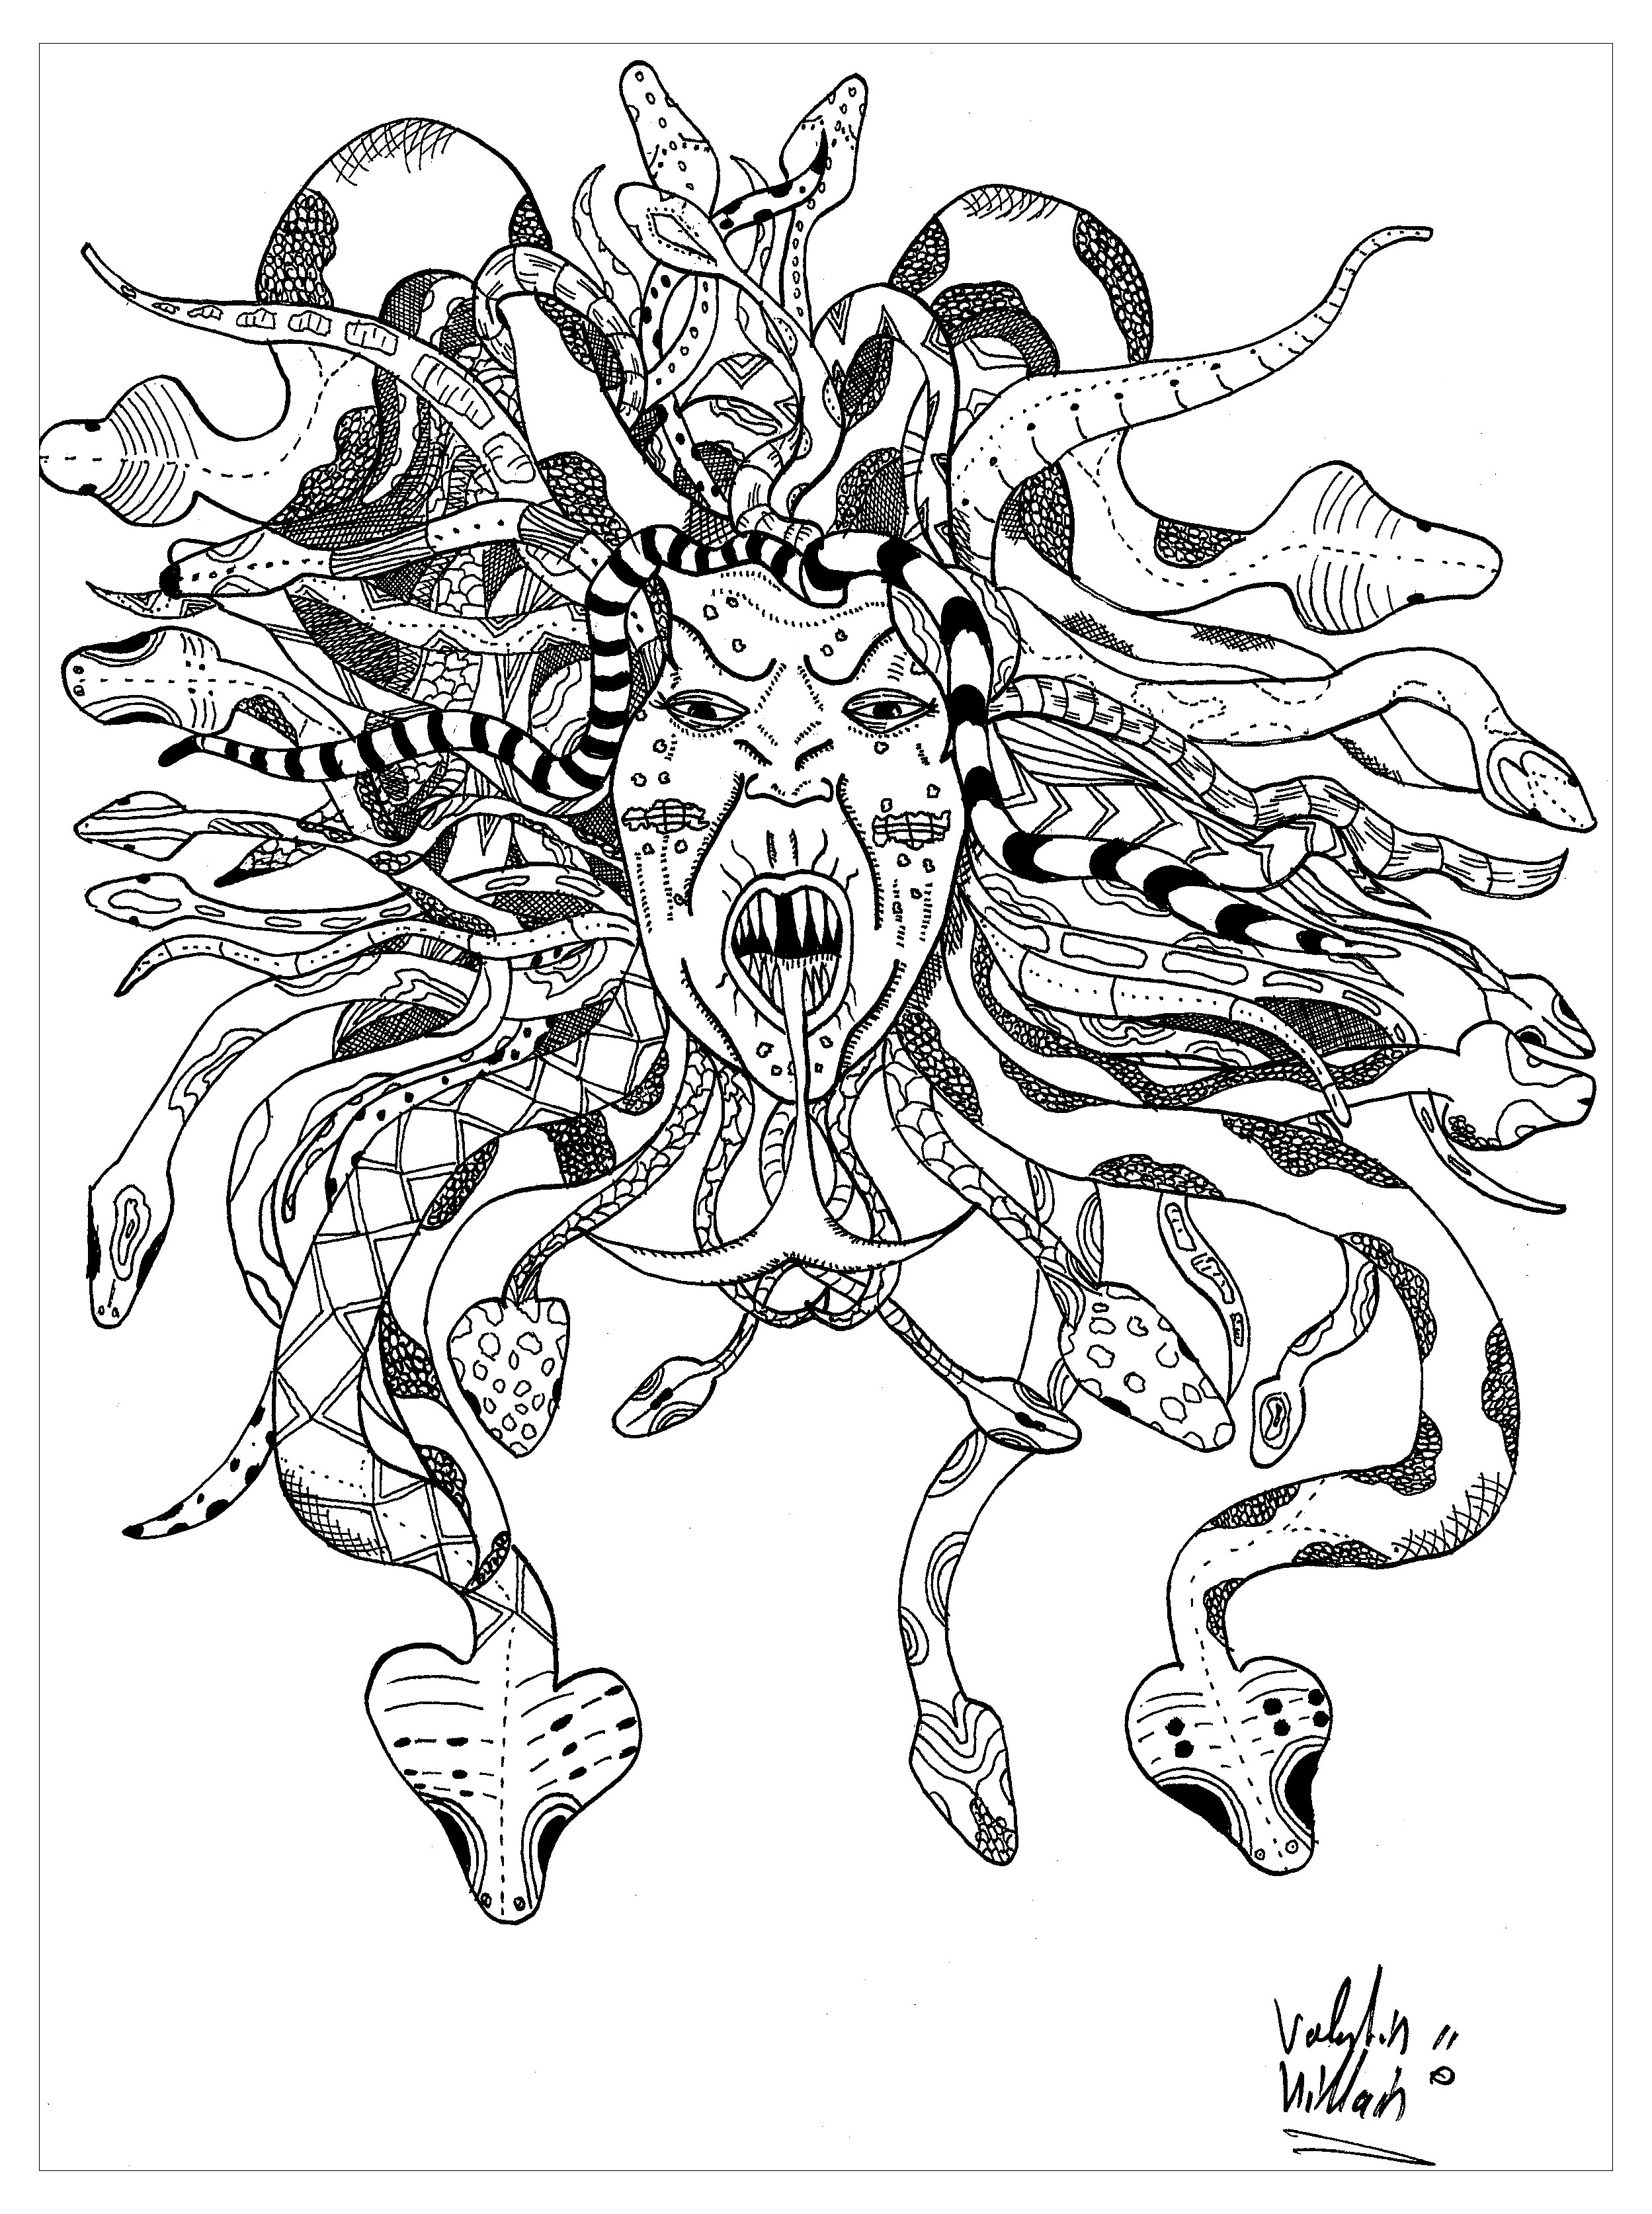 Coloring representing MedusaHere is a magnificent representation of the mythical Gorgon Medusa. Her face is surrounded by a mane that is intertwined with snakes, which gives her a terrifying look.